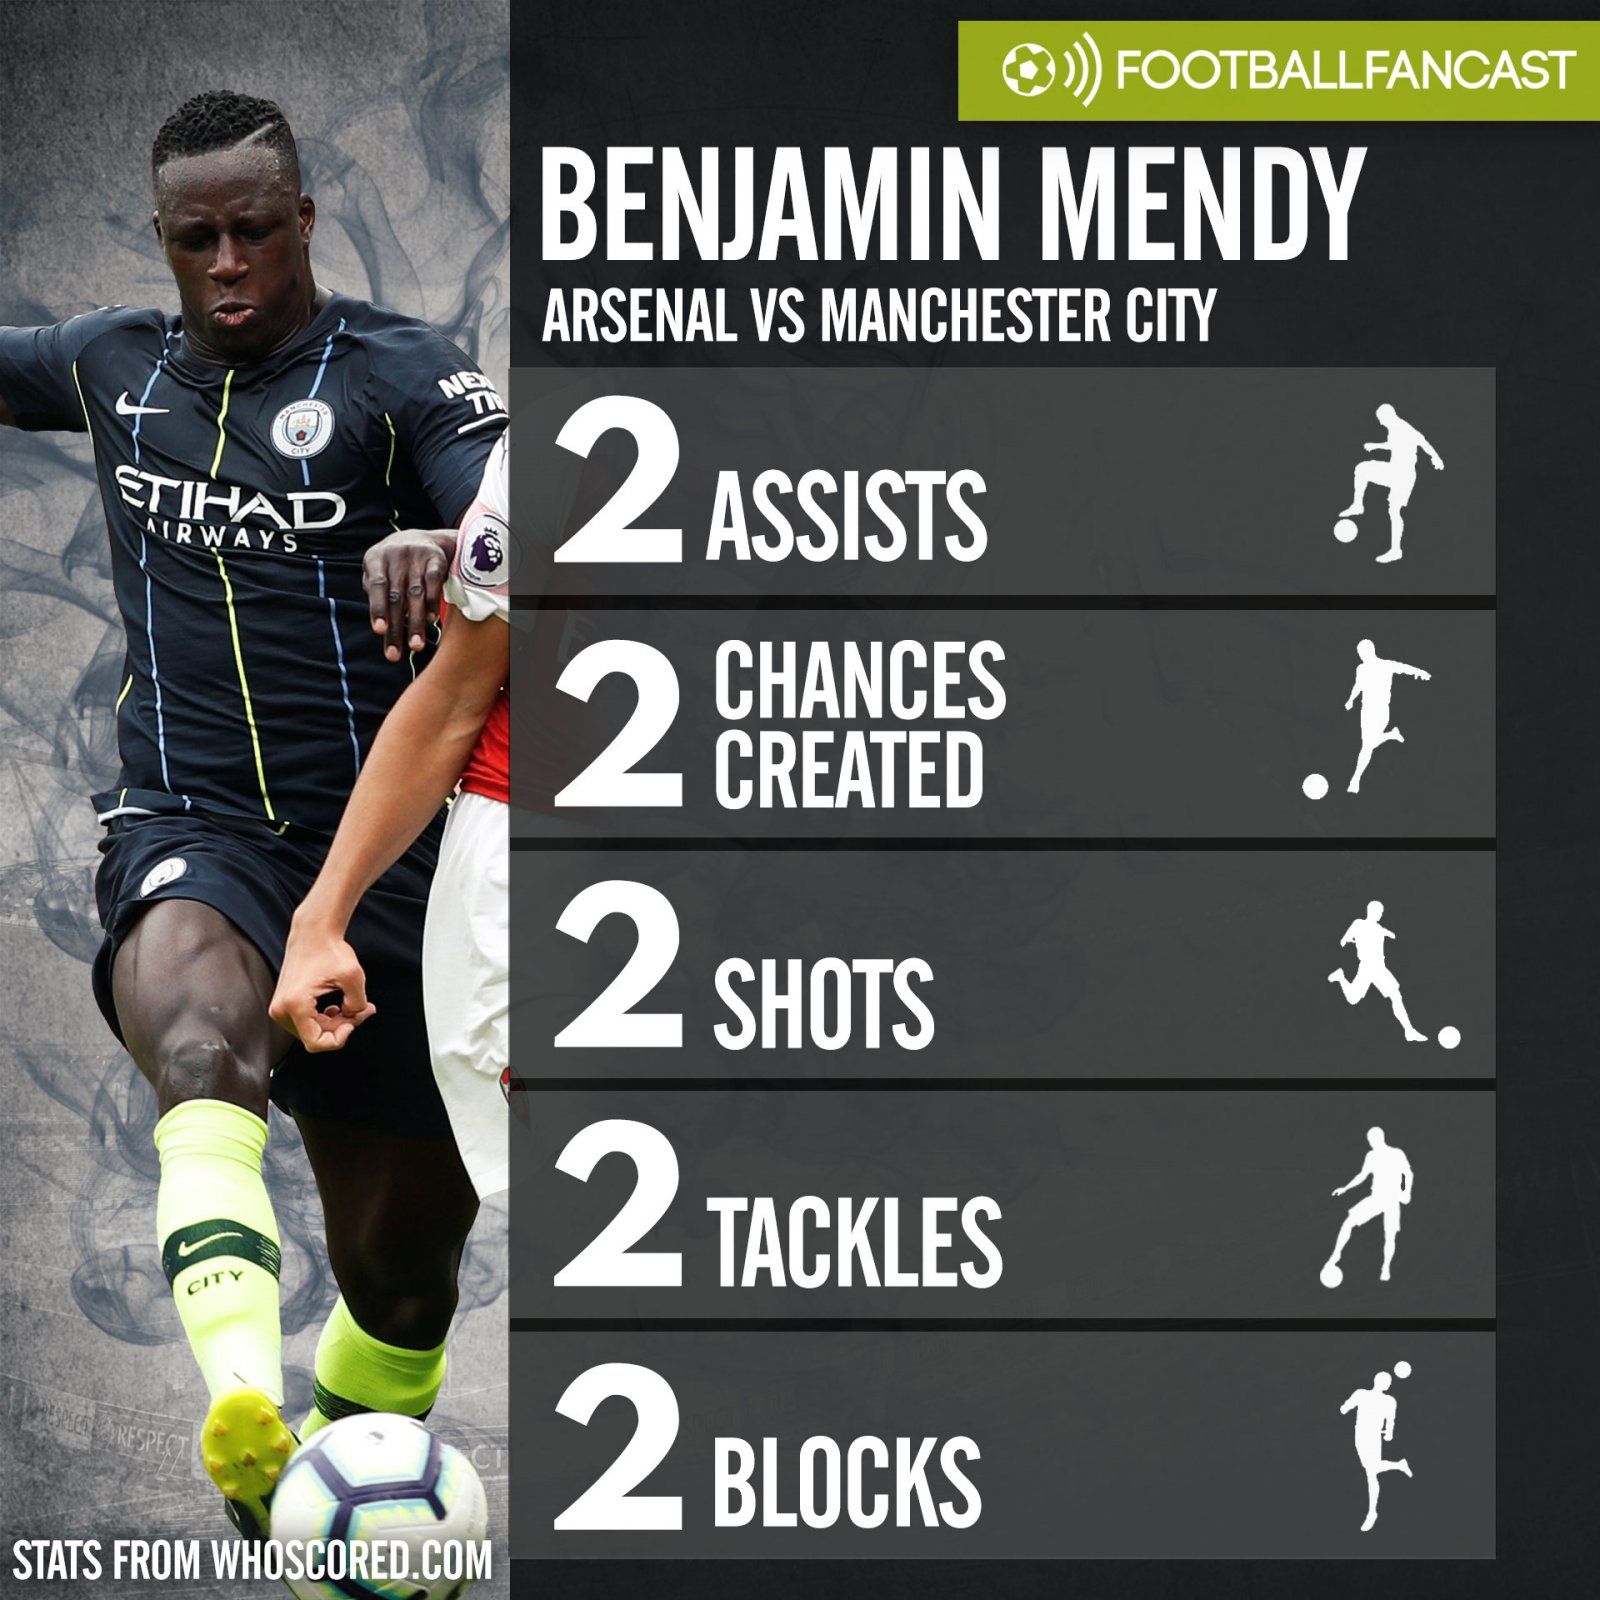 Benjamin Mendy's stats from Man City's 2-0 win over Arsenal